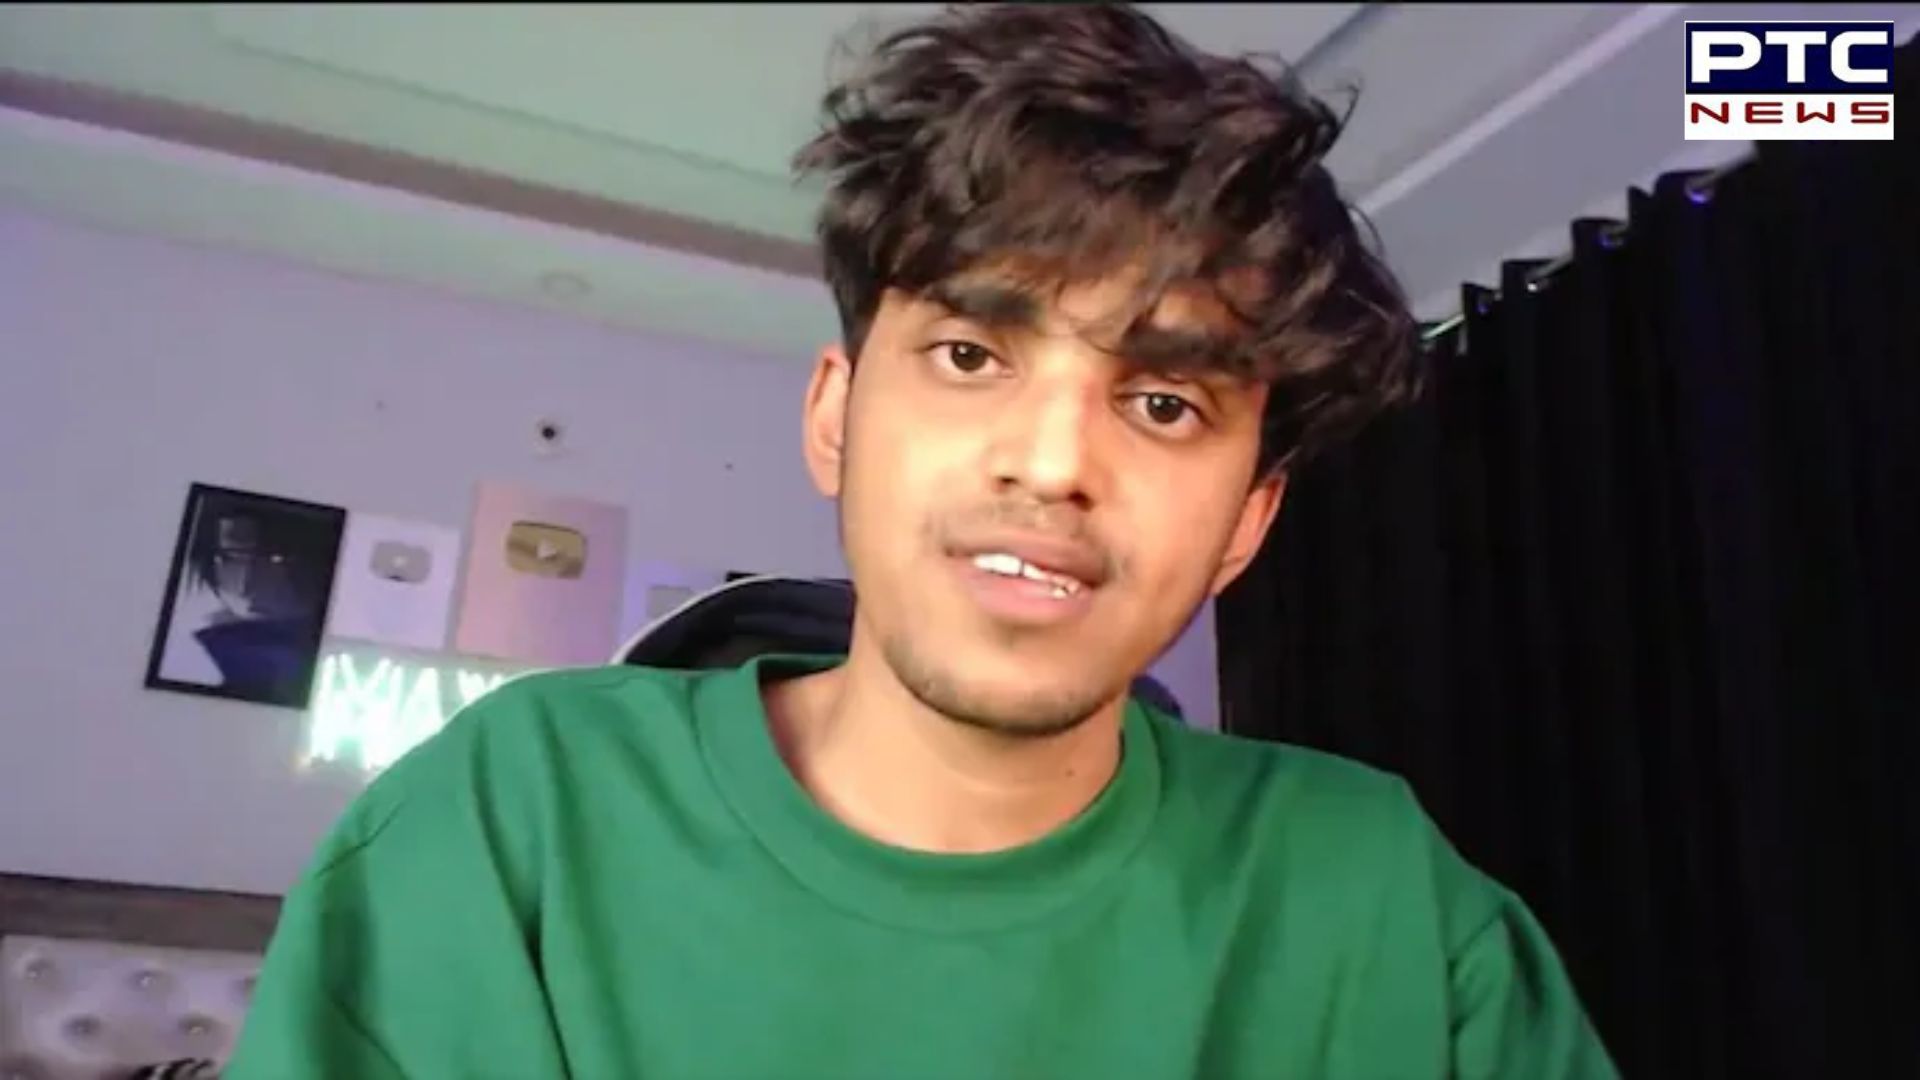 YouTuber accuses Elvish Yadav of attempting to break his spine and disable him; FIR registered